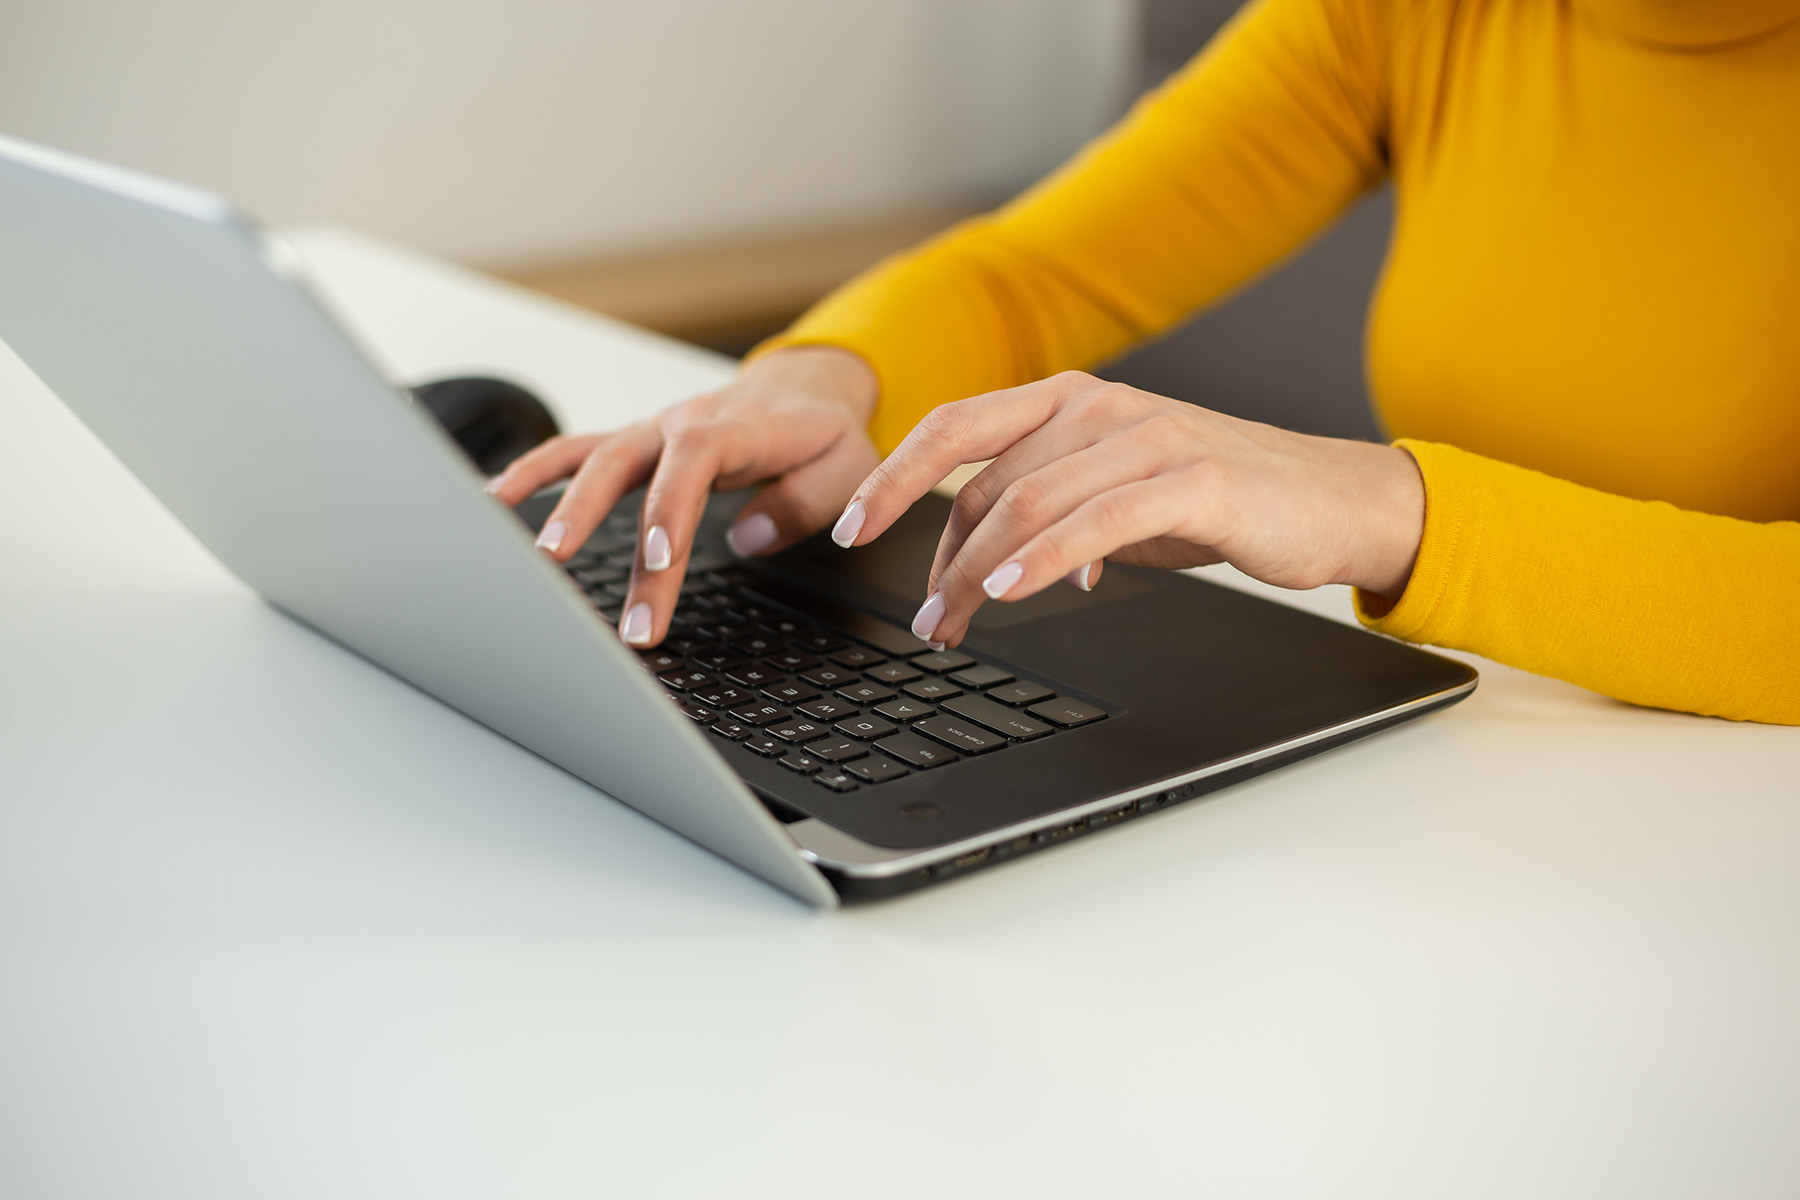 A woman with a gold sweater on types on a laptop. 